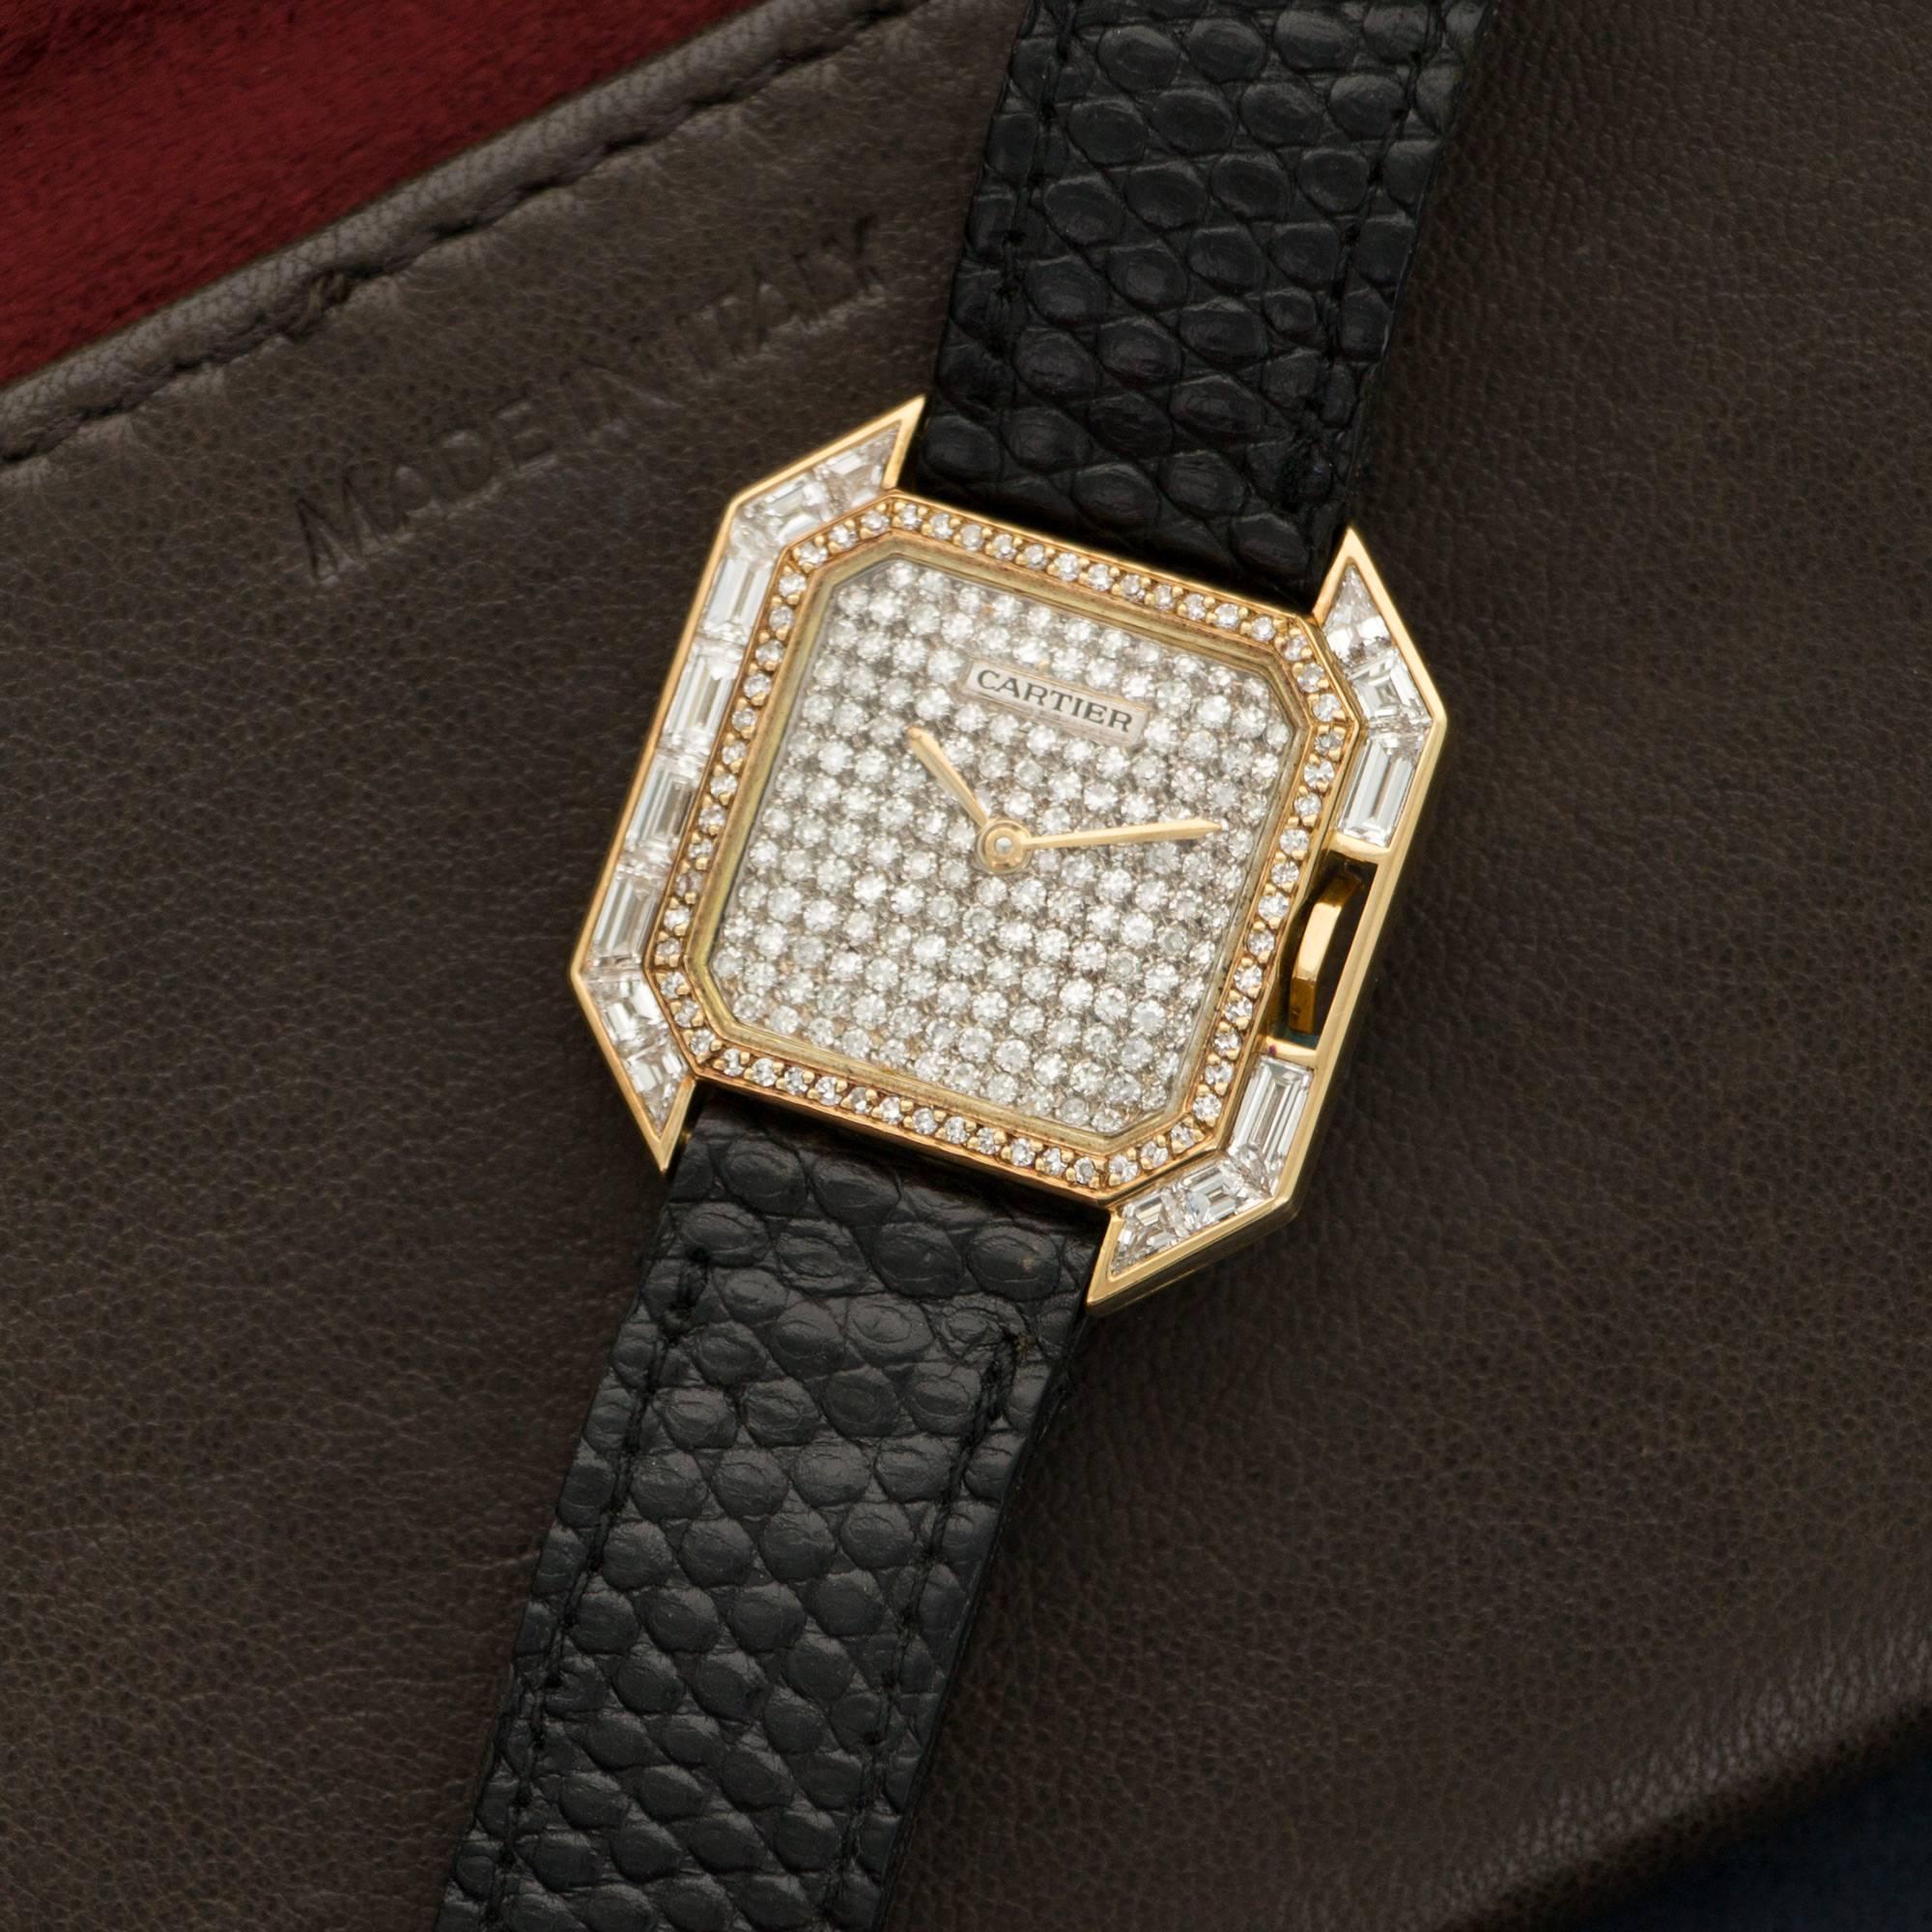 An 18k Yellow Gold Square Tank by Cartier. All Original Baguette Diamond Case with Pave Diamond Dial. Circa 1980's. Case Measures 25 X 25mm. Mechanical Wind. 